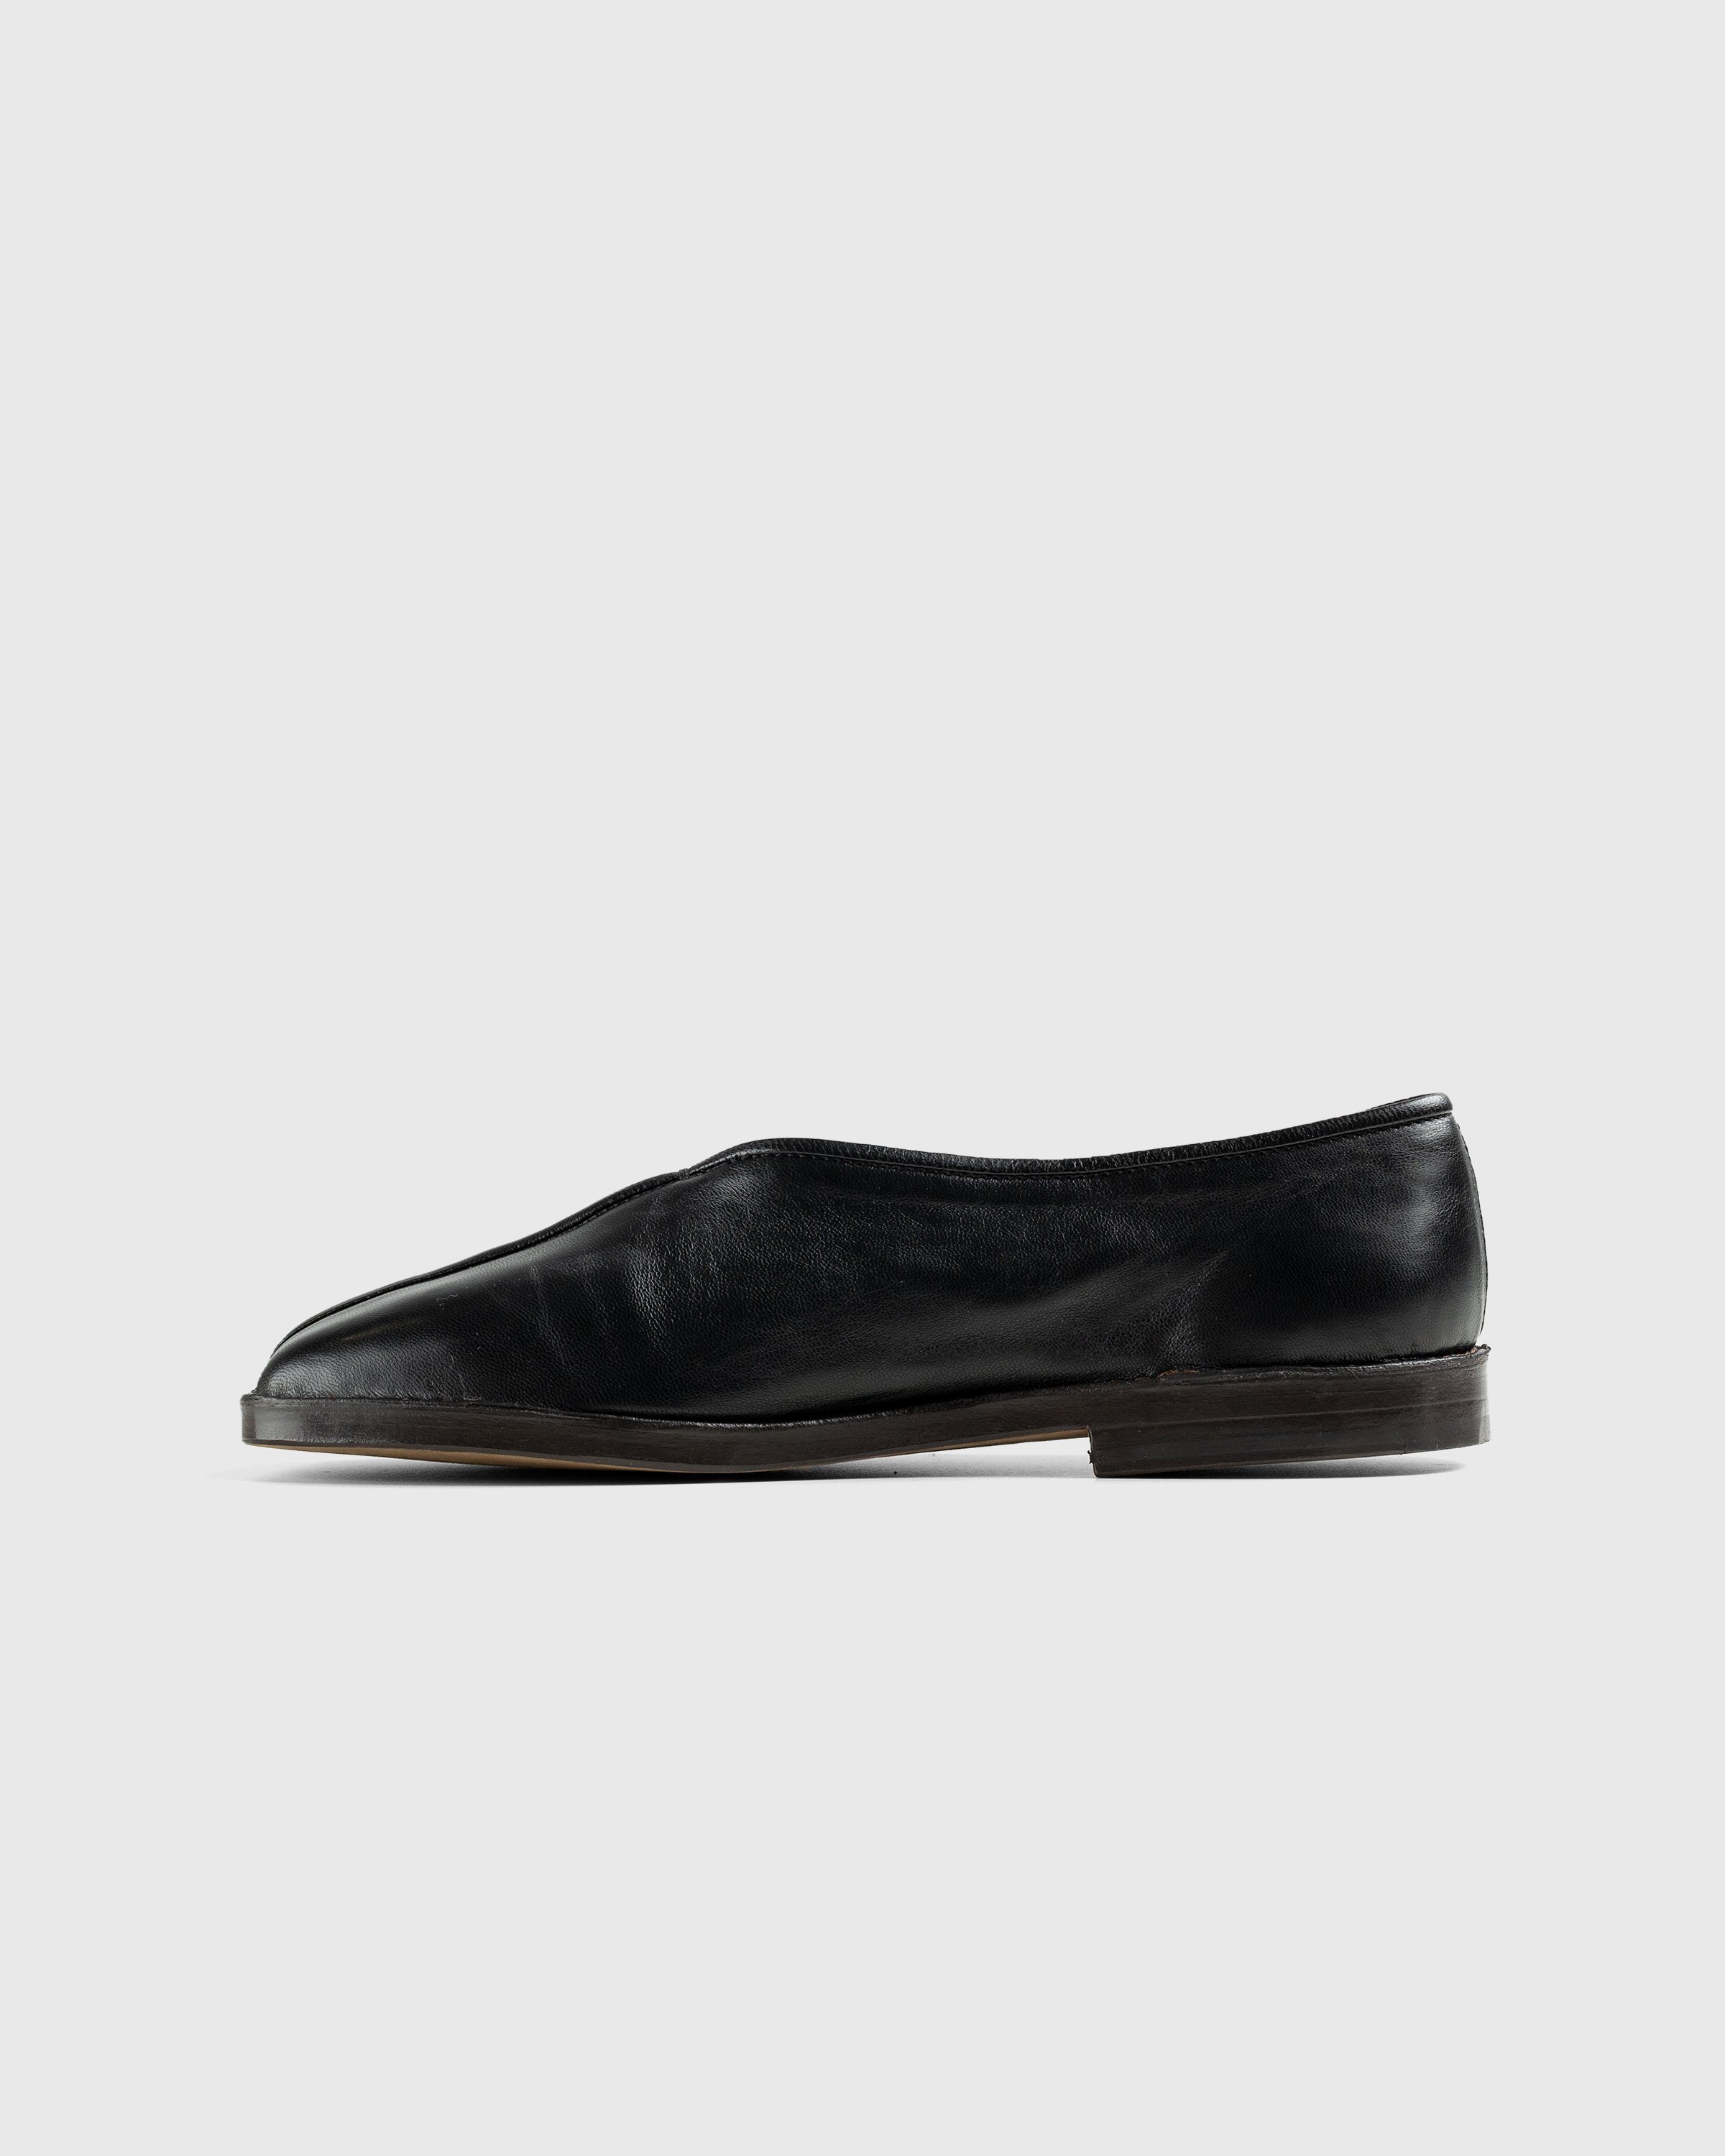 Lemaire - Flat Piped Slippers - Footwear - Black - Image 2